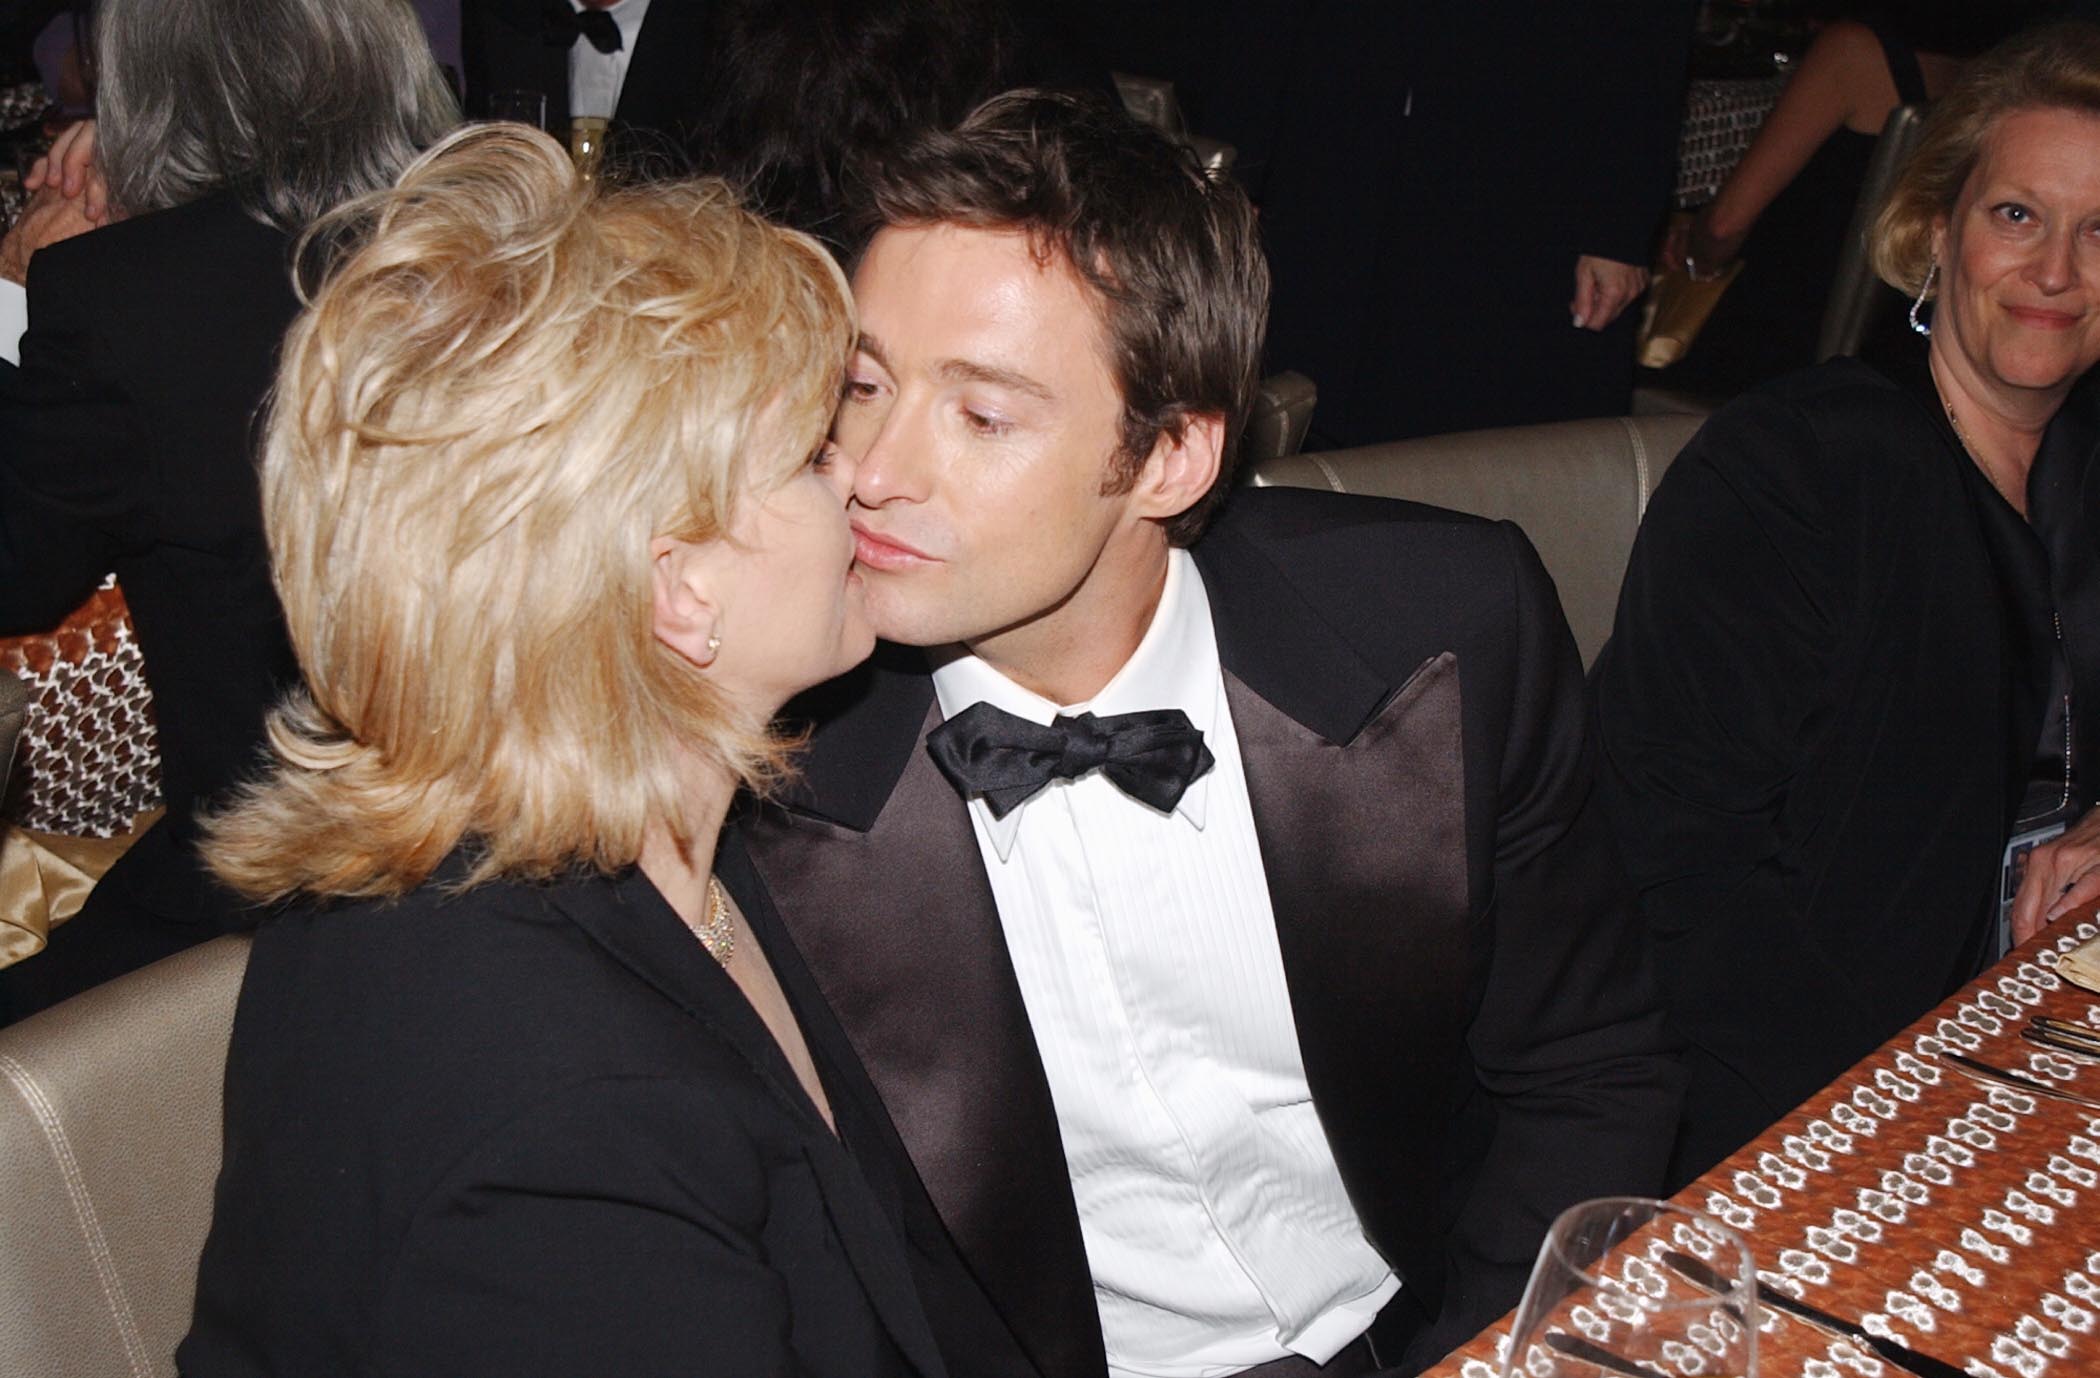 Deborra-Lee Furness and Hugh Jackman at the 74th Annual Academy Awards - Governors Ball in Hollywood, California, on March 24, 2002 | Source: Getty Images